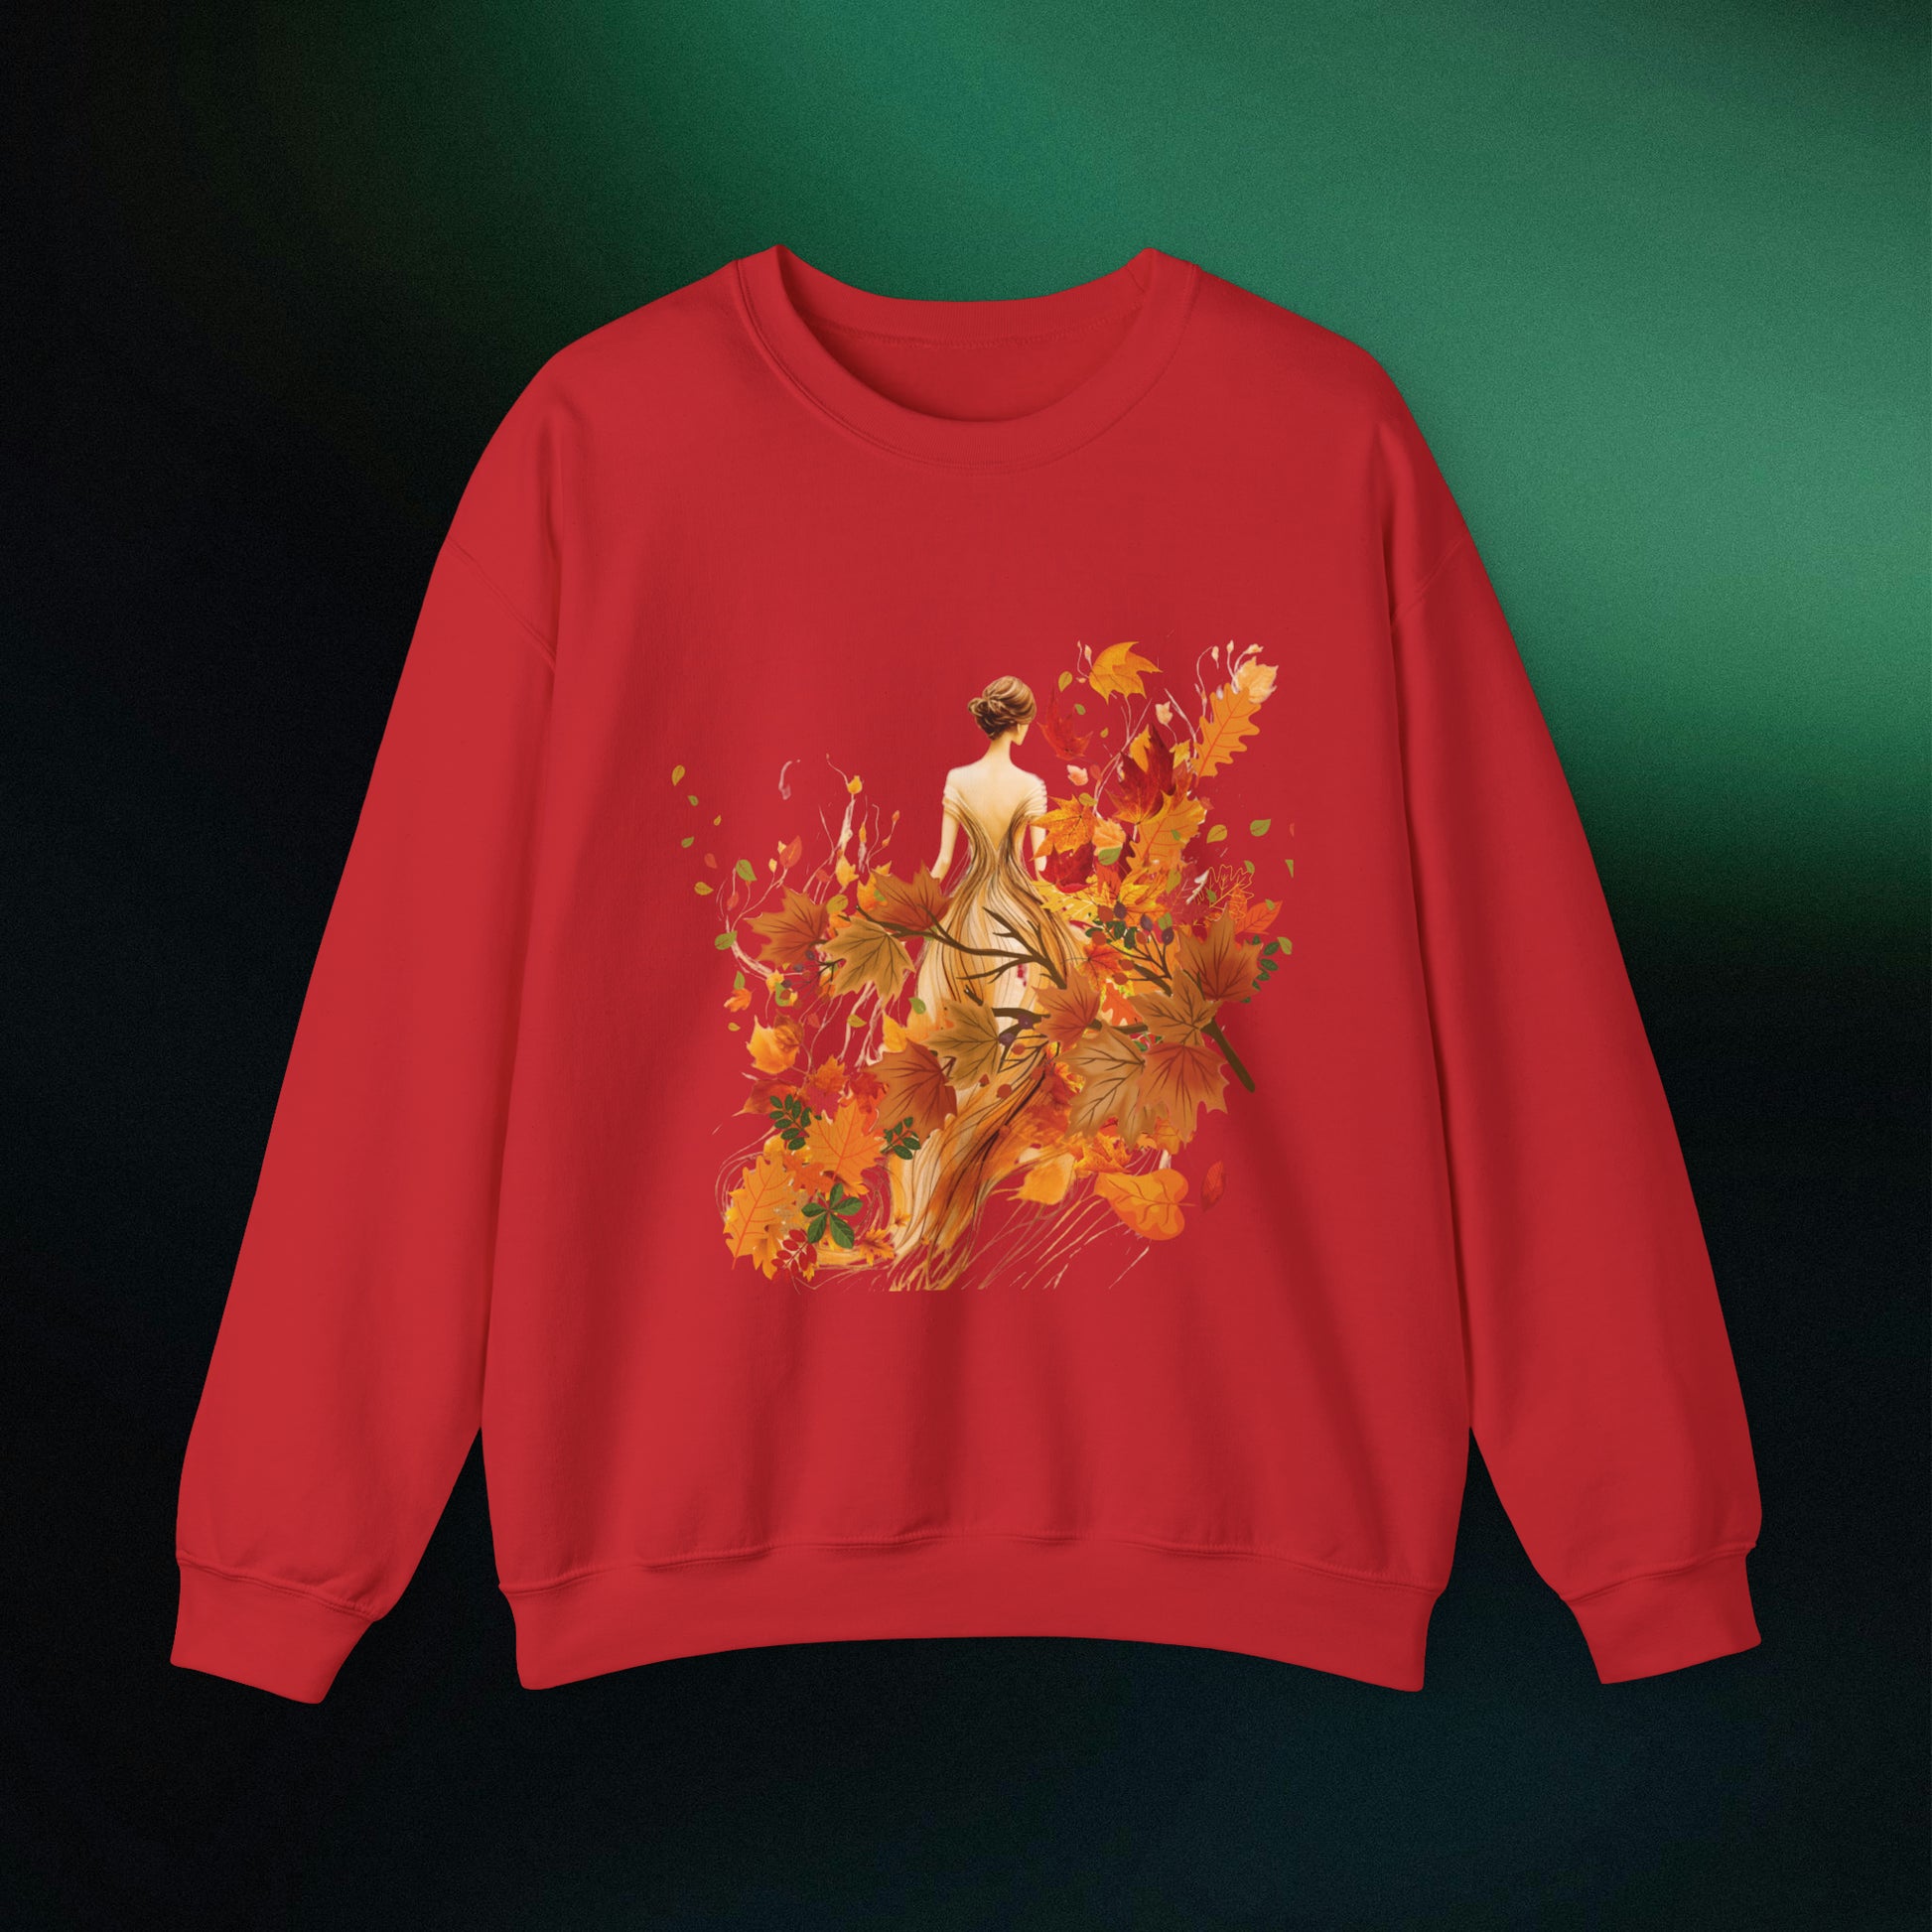 Whimsical Dreams in Autumn Hues: Romantic Dreamy Female Surrounded by Autumn Leaves Sweatshirt Sweatshirt S Red 